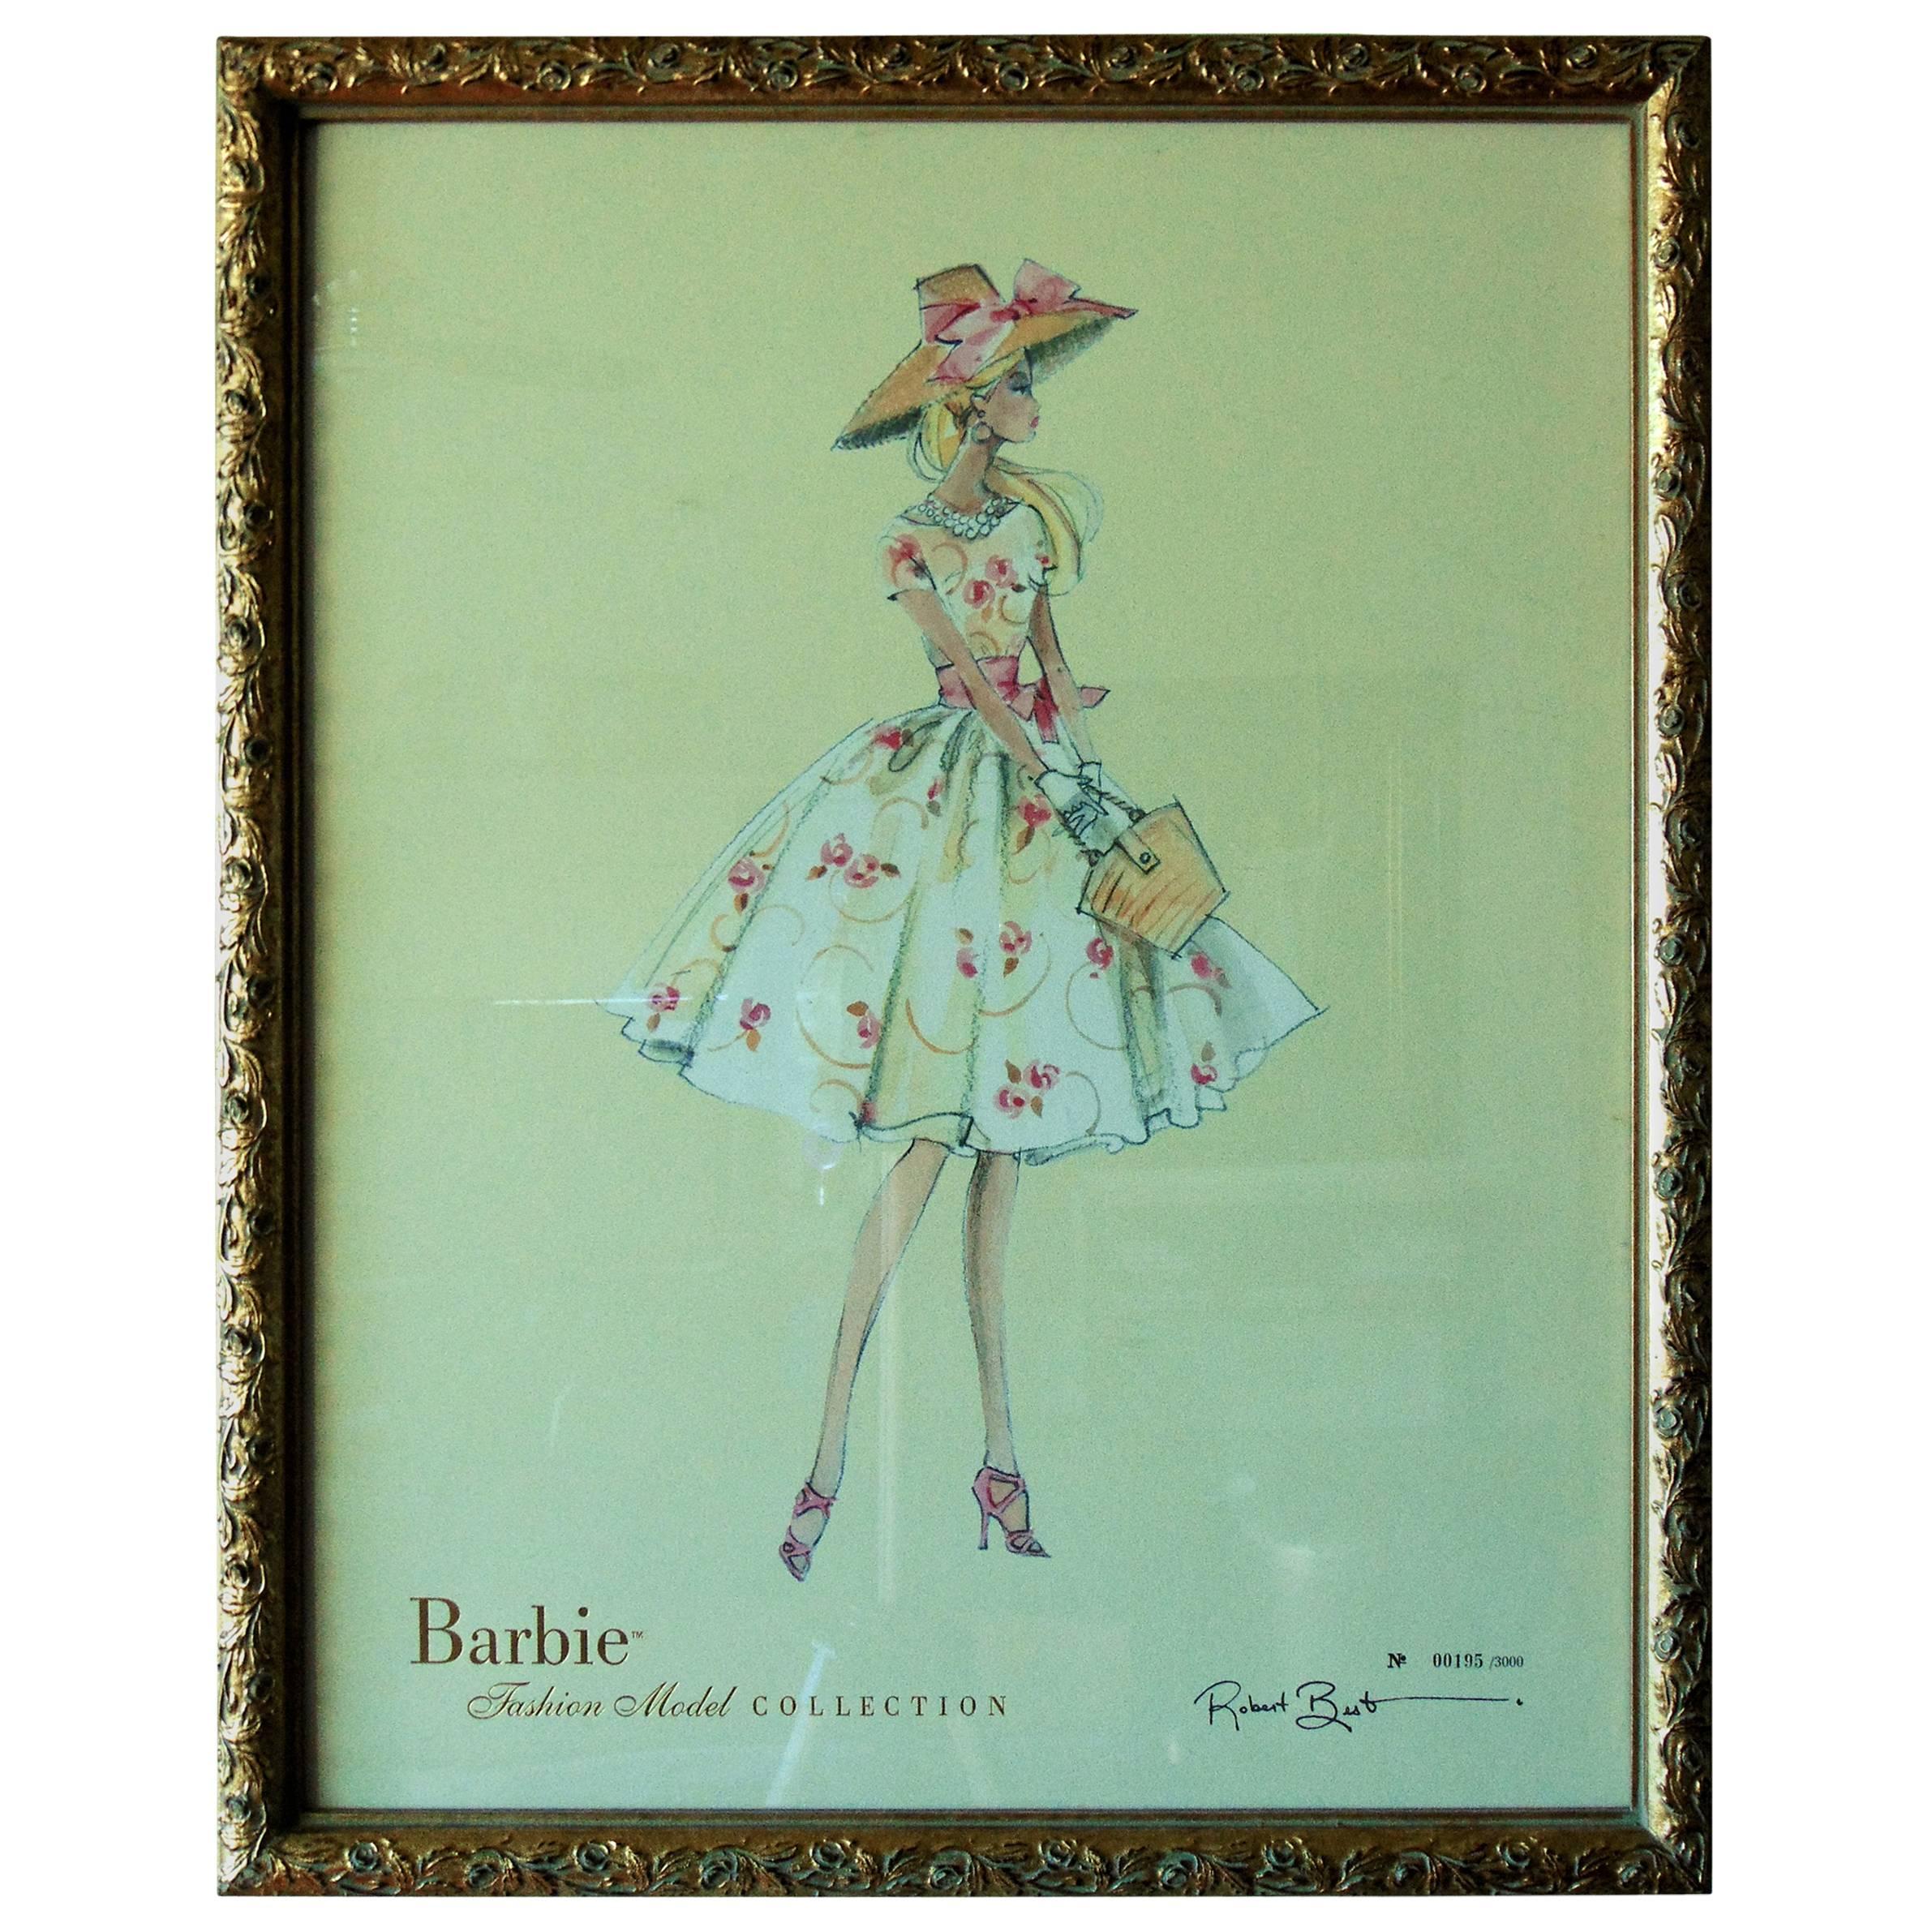 Limited Edition Barbie Fashion Model Print 'Garden Party' by Robert Best 2007